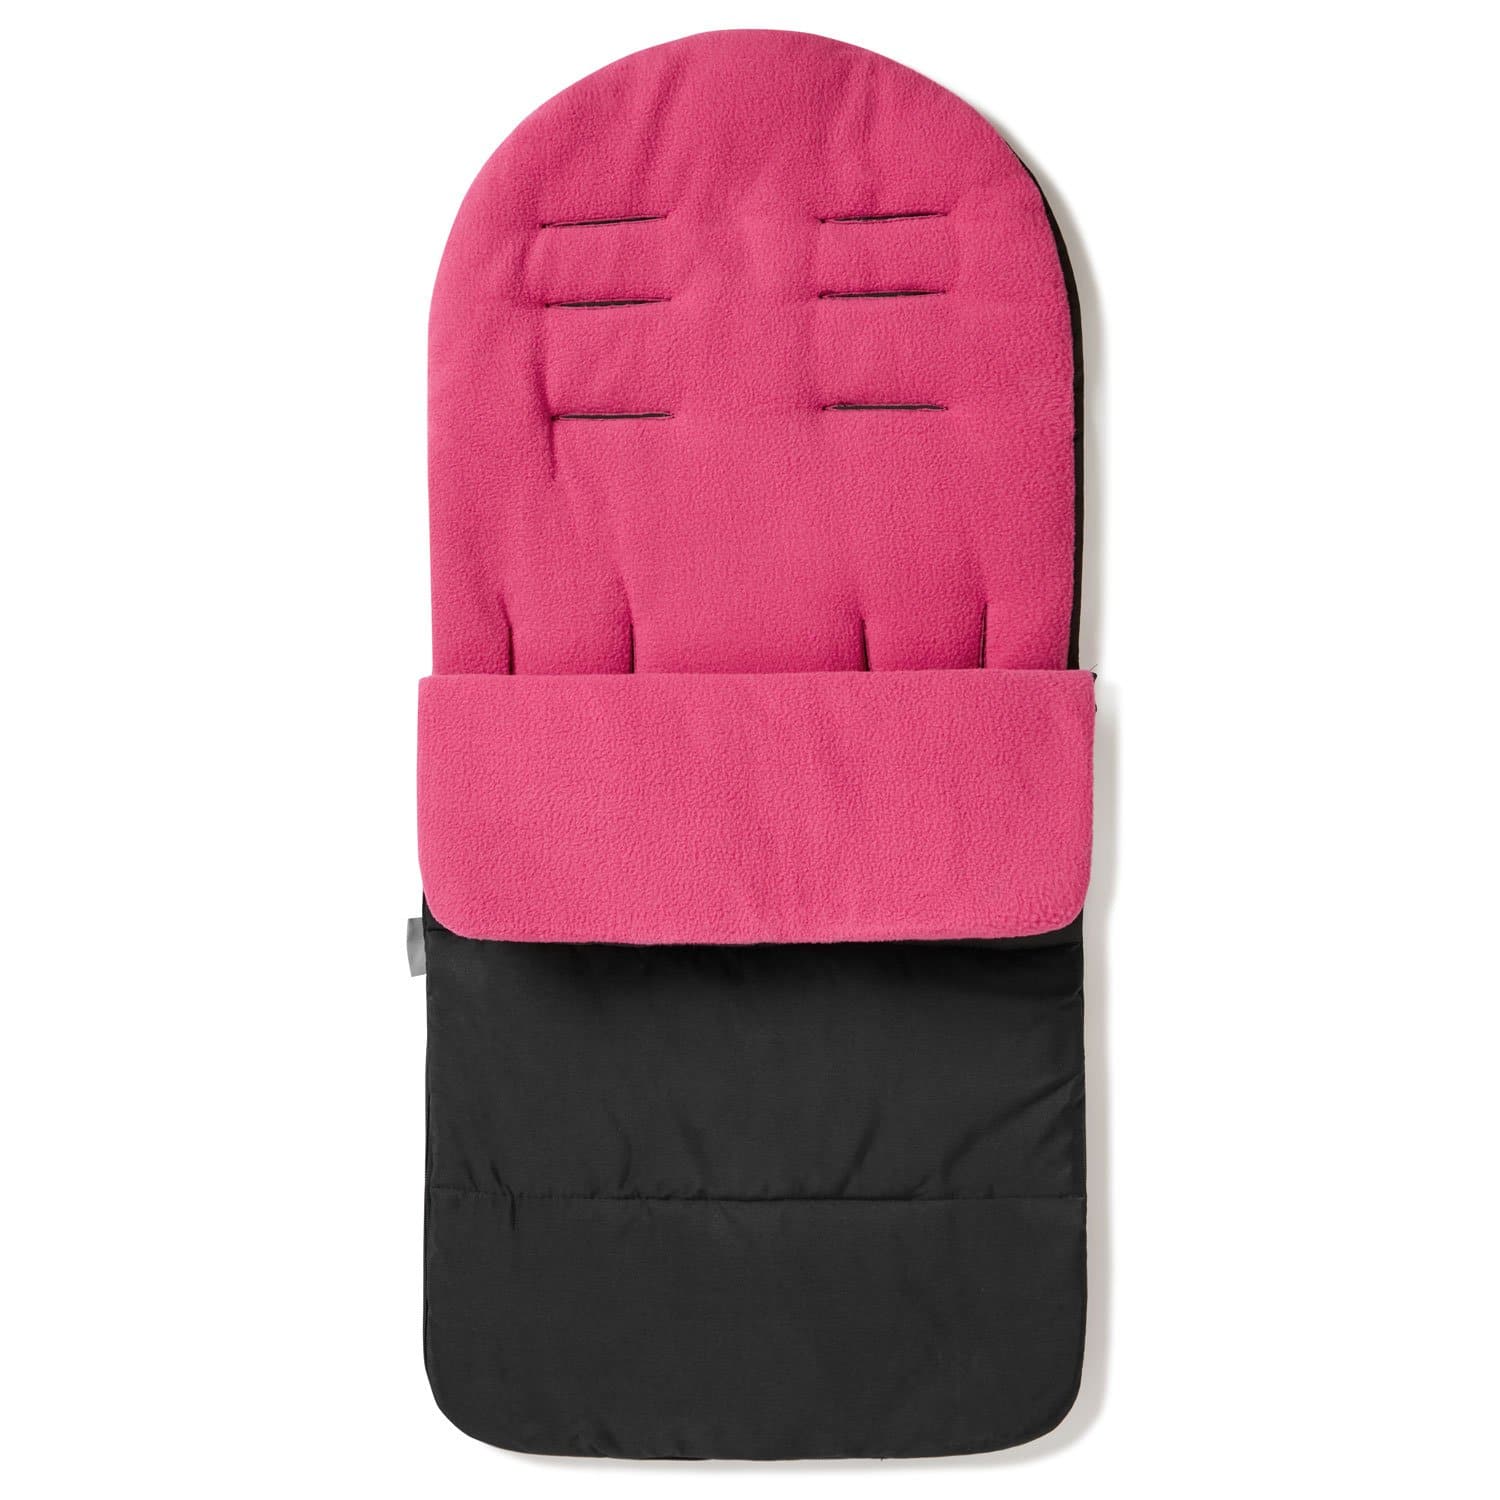 Premium Footmuff / Cosy Toes Compatible with Brio - Pink Rose / Fits All Models | For Your Little One